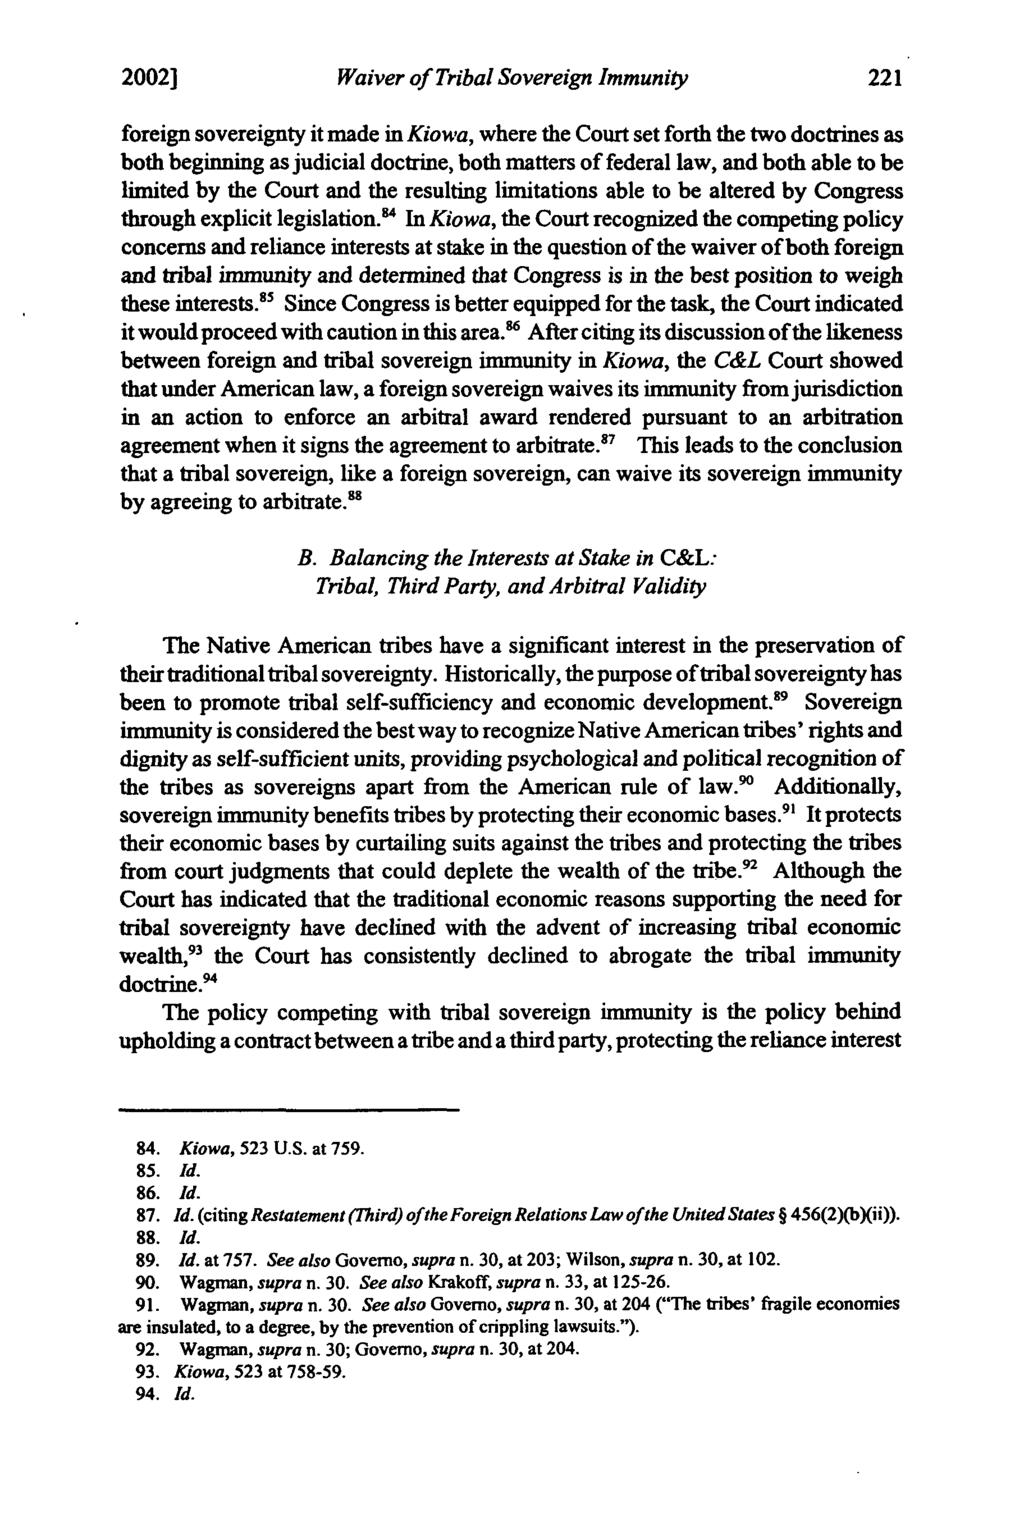 2002] Huitsing: Huitsing: Ability of Native American Tribes Waiver of Tribal Sovereign Immunity foreign sovereignty it made in Kiowa, where the Court set forth the two doctrines as both beginning as